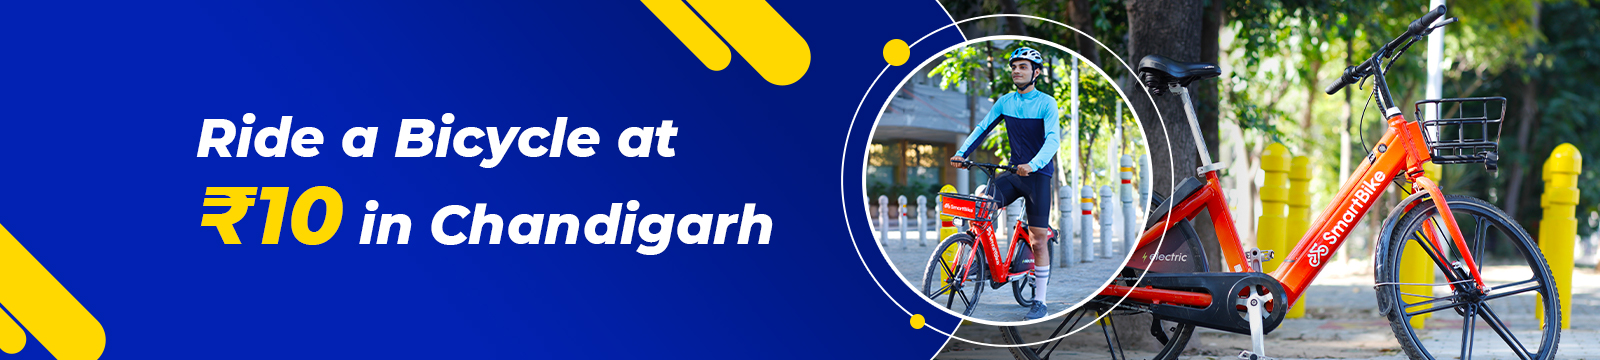 Ride a Bicycle at  ₹10 in Chandigarh– 5 Ways The Smart Bike Mobility Program Impacts Us All